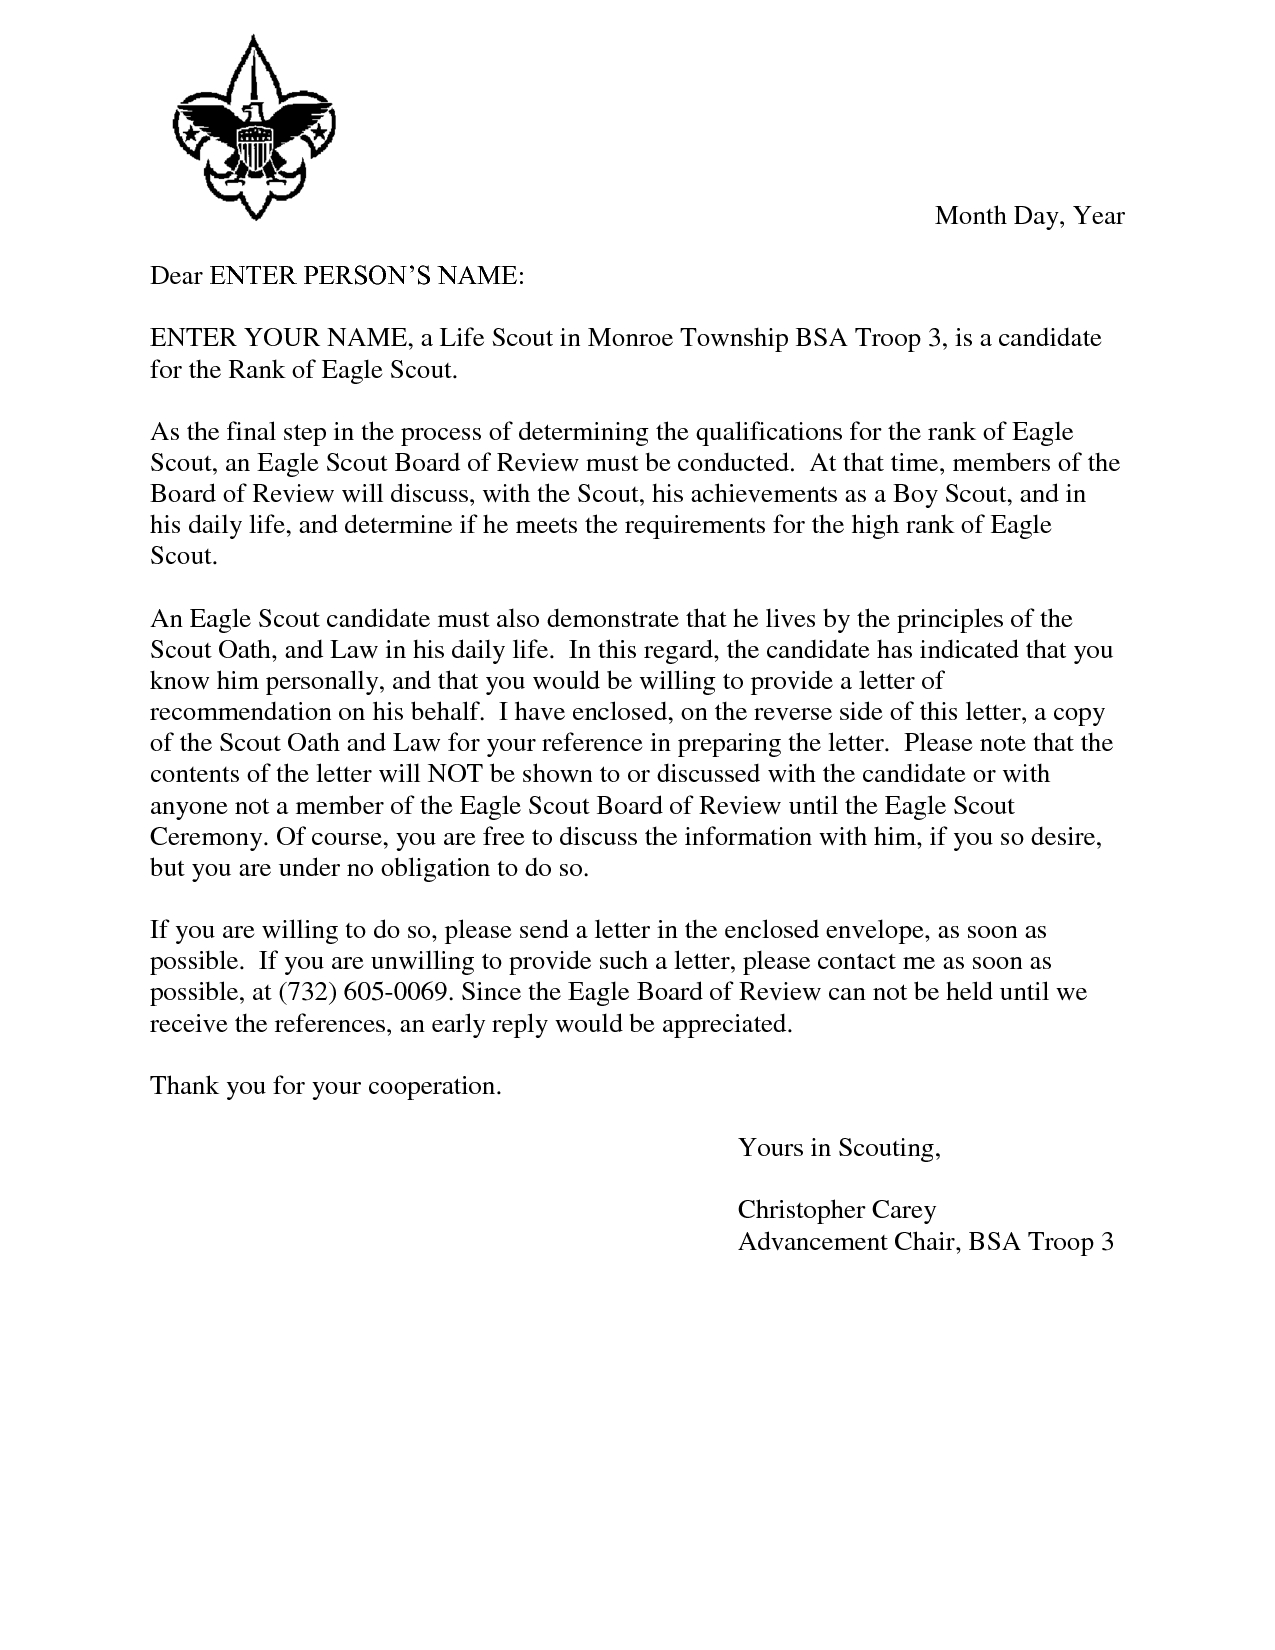 Letter to Troops Template - Eagle Scout Reference Request Sample Letter Doc 7 by Hfr990q